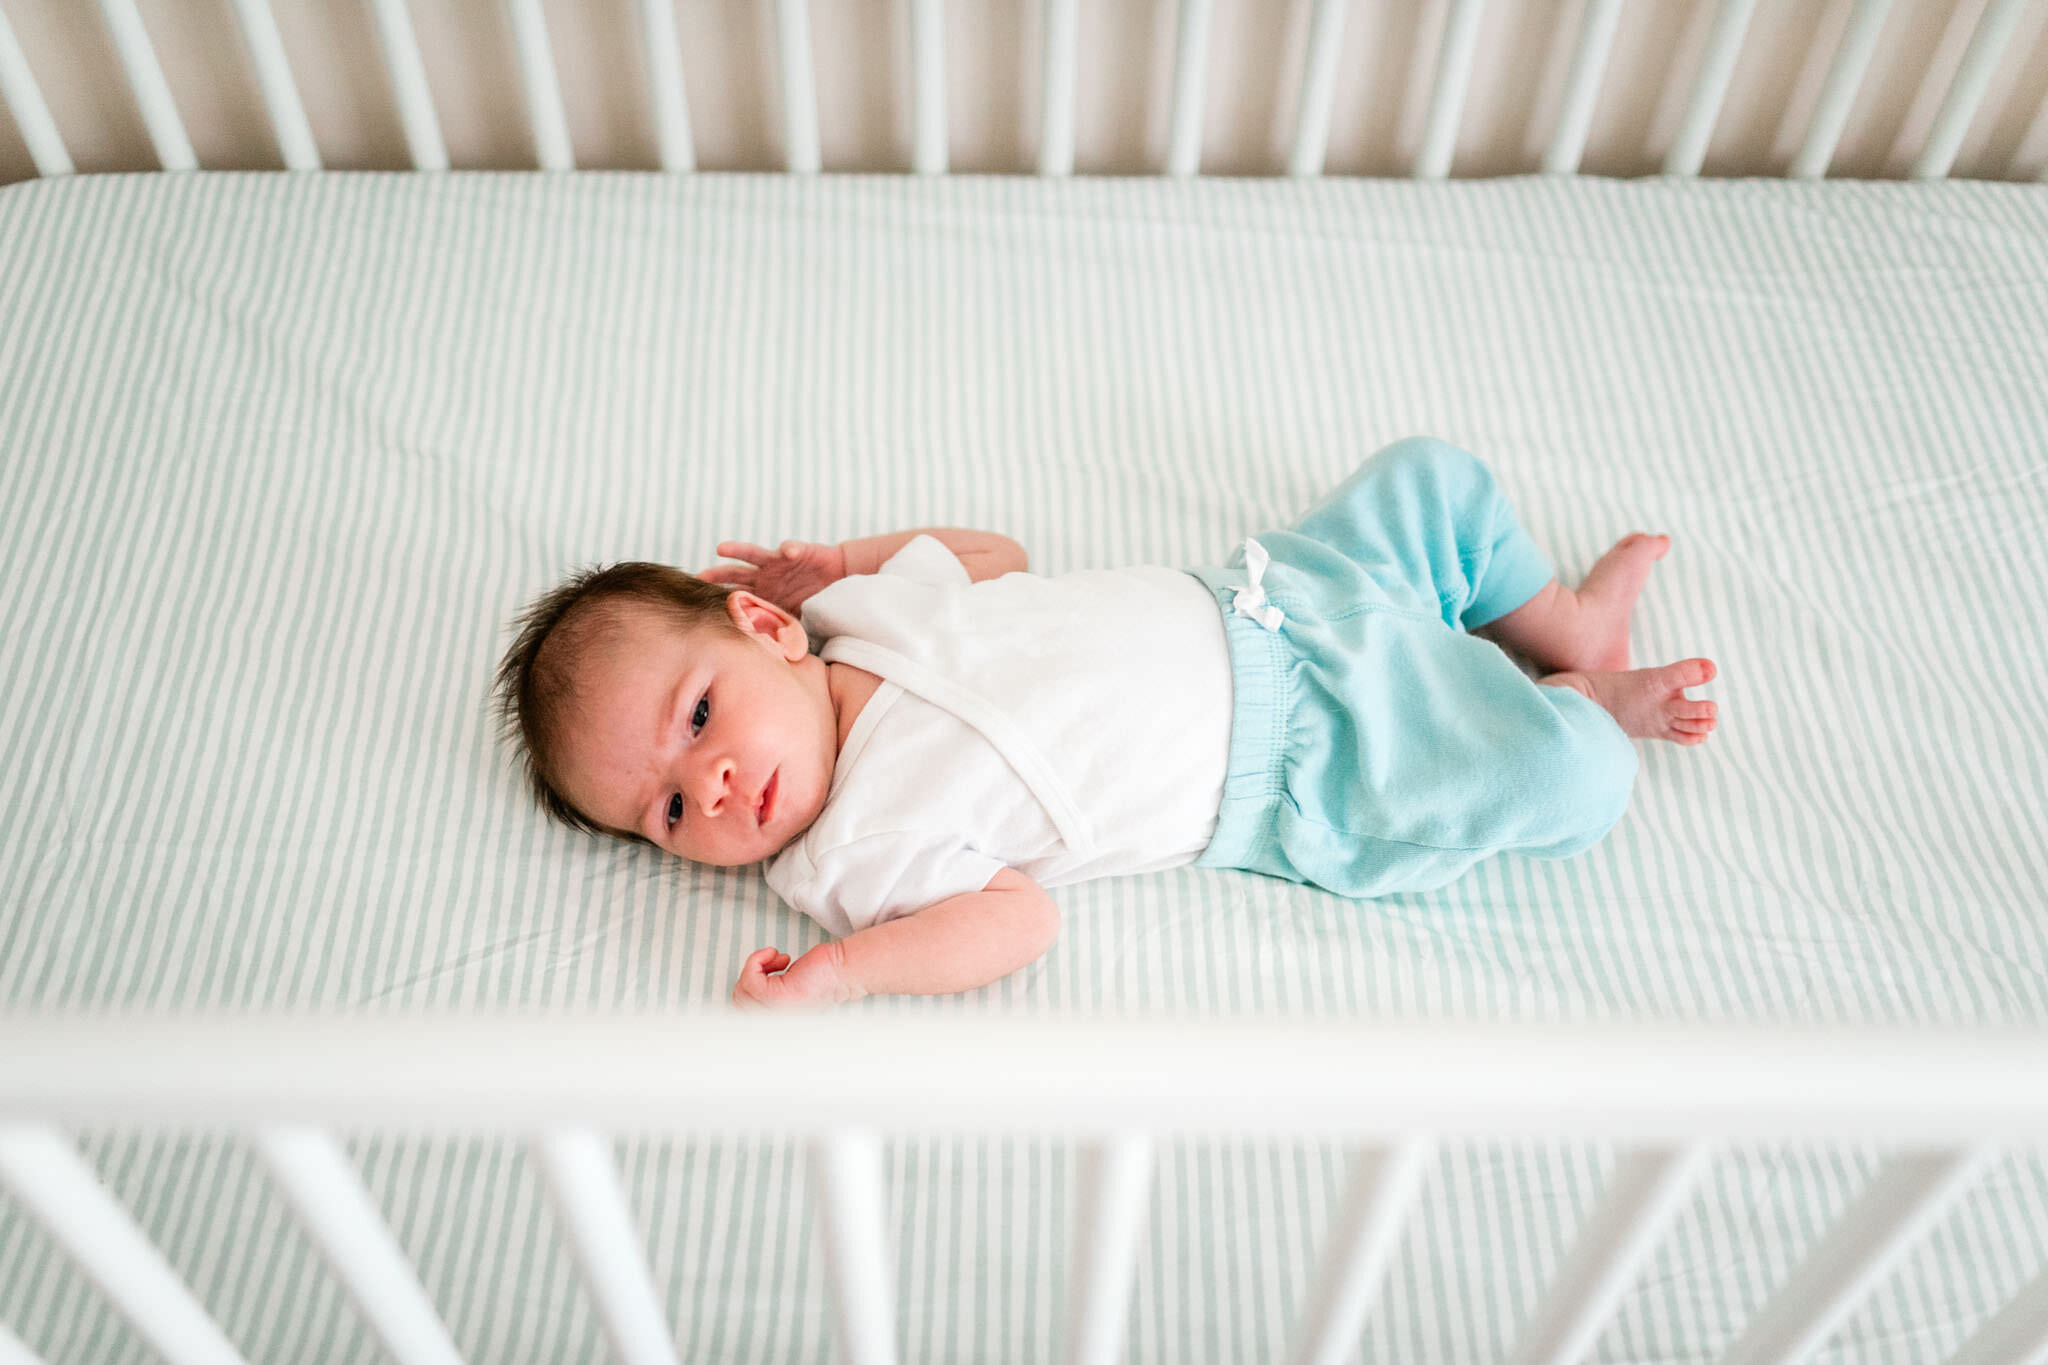 Raleigh Newborn Photographer | By G. Lin Photography | Baby laying in crib